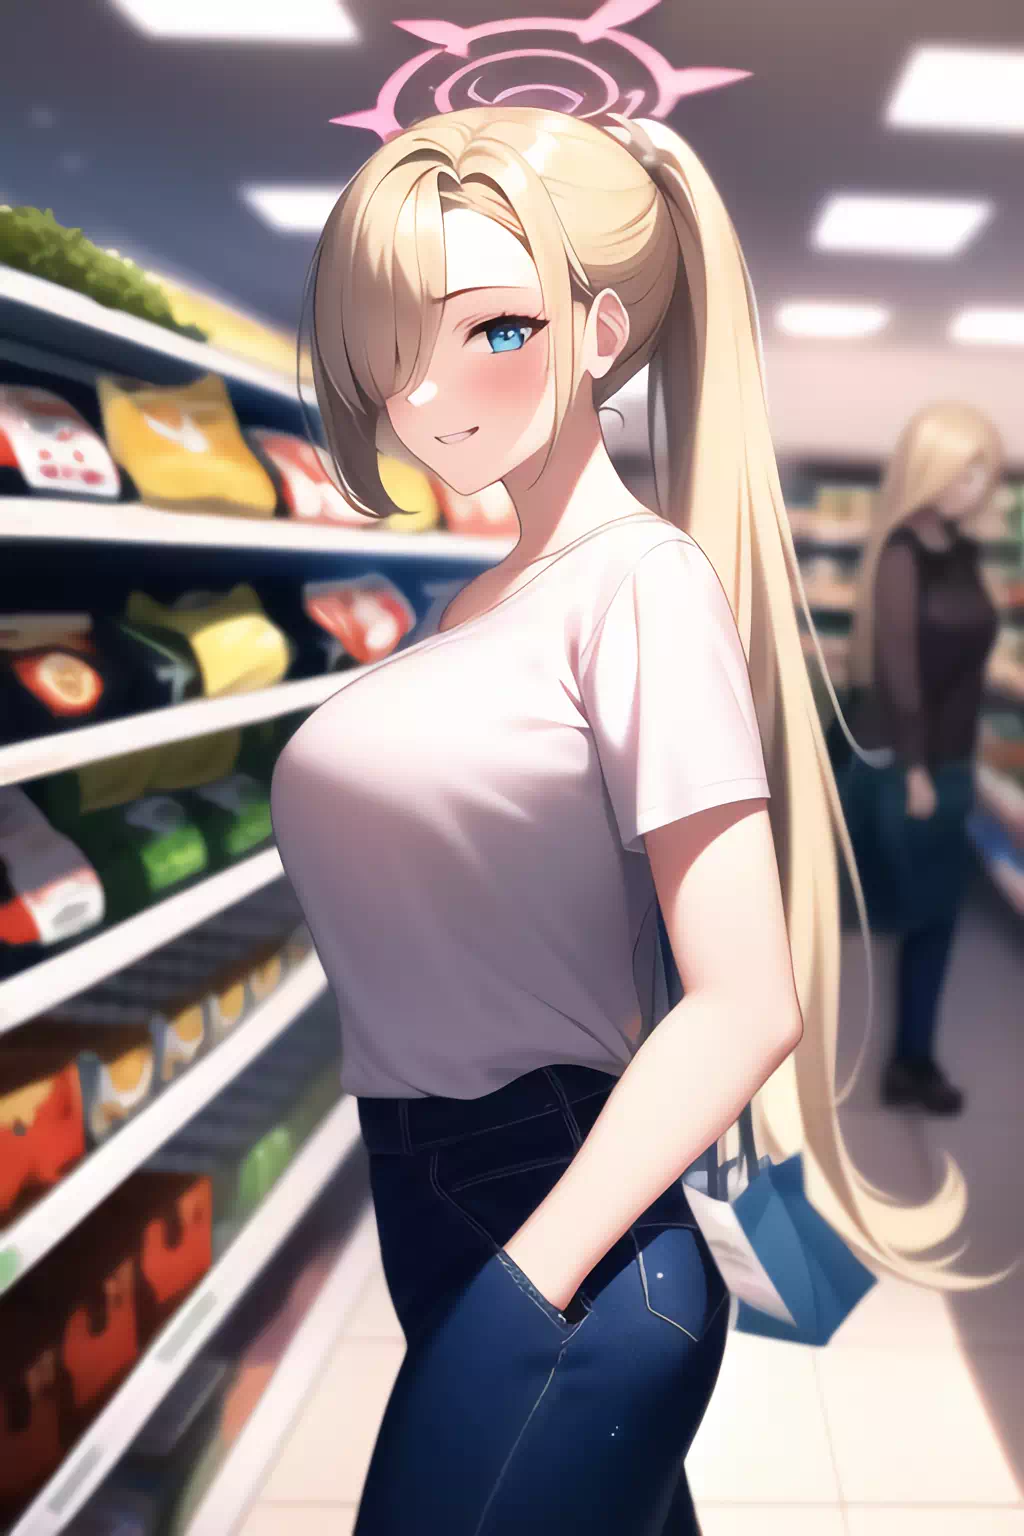 POV ： A shopping day with Asuna